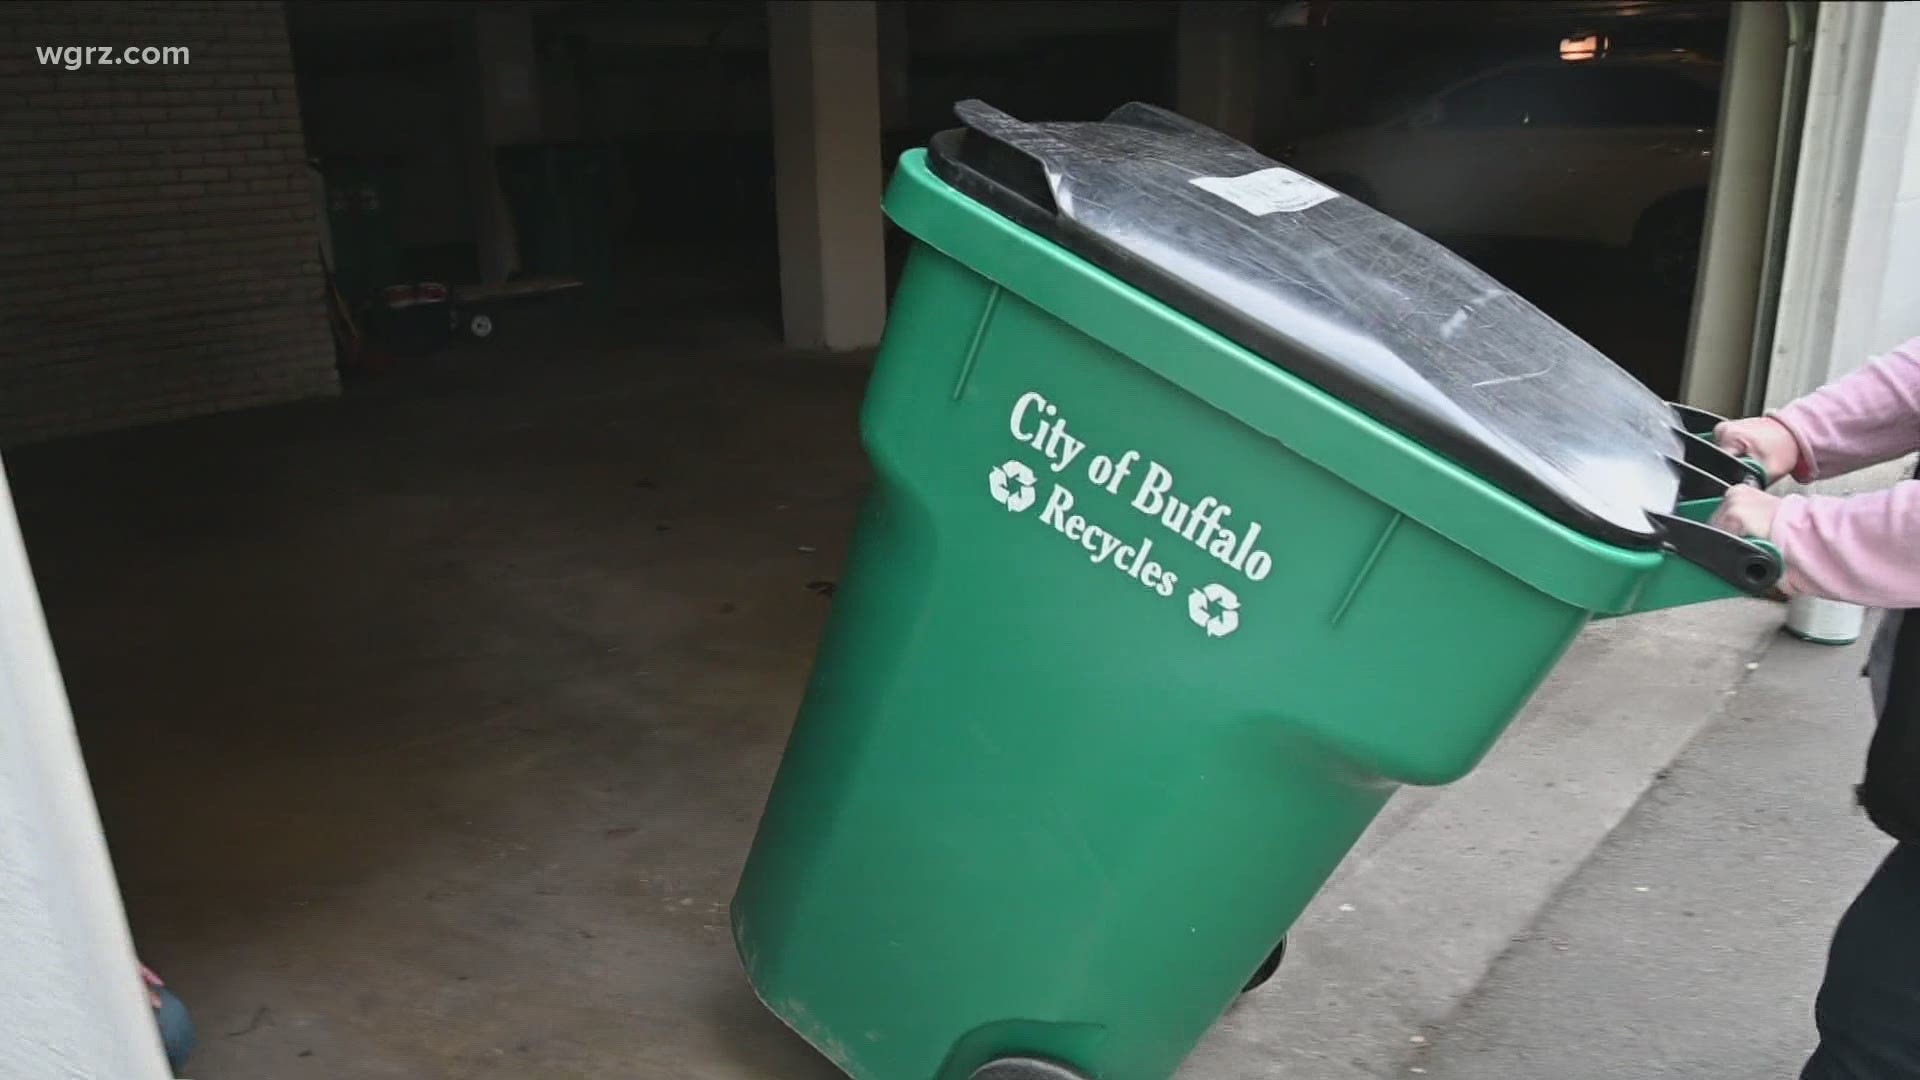 Channel 2 reporter Michael Wooten found out exactly what should and should not go into the recycle bin.